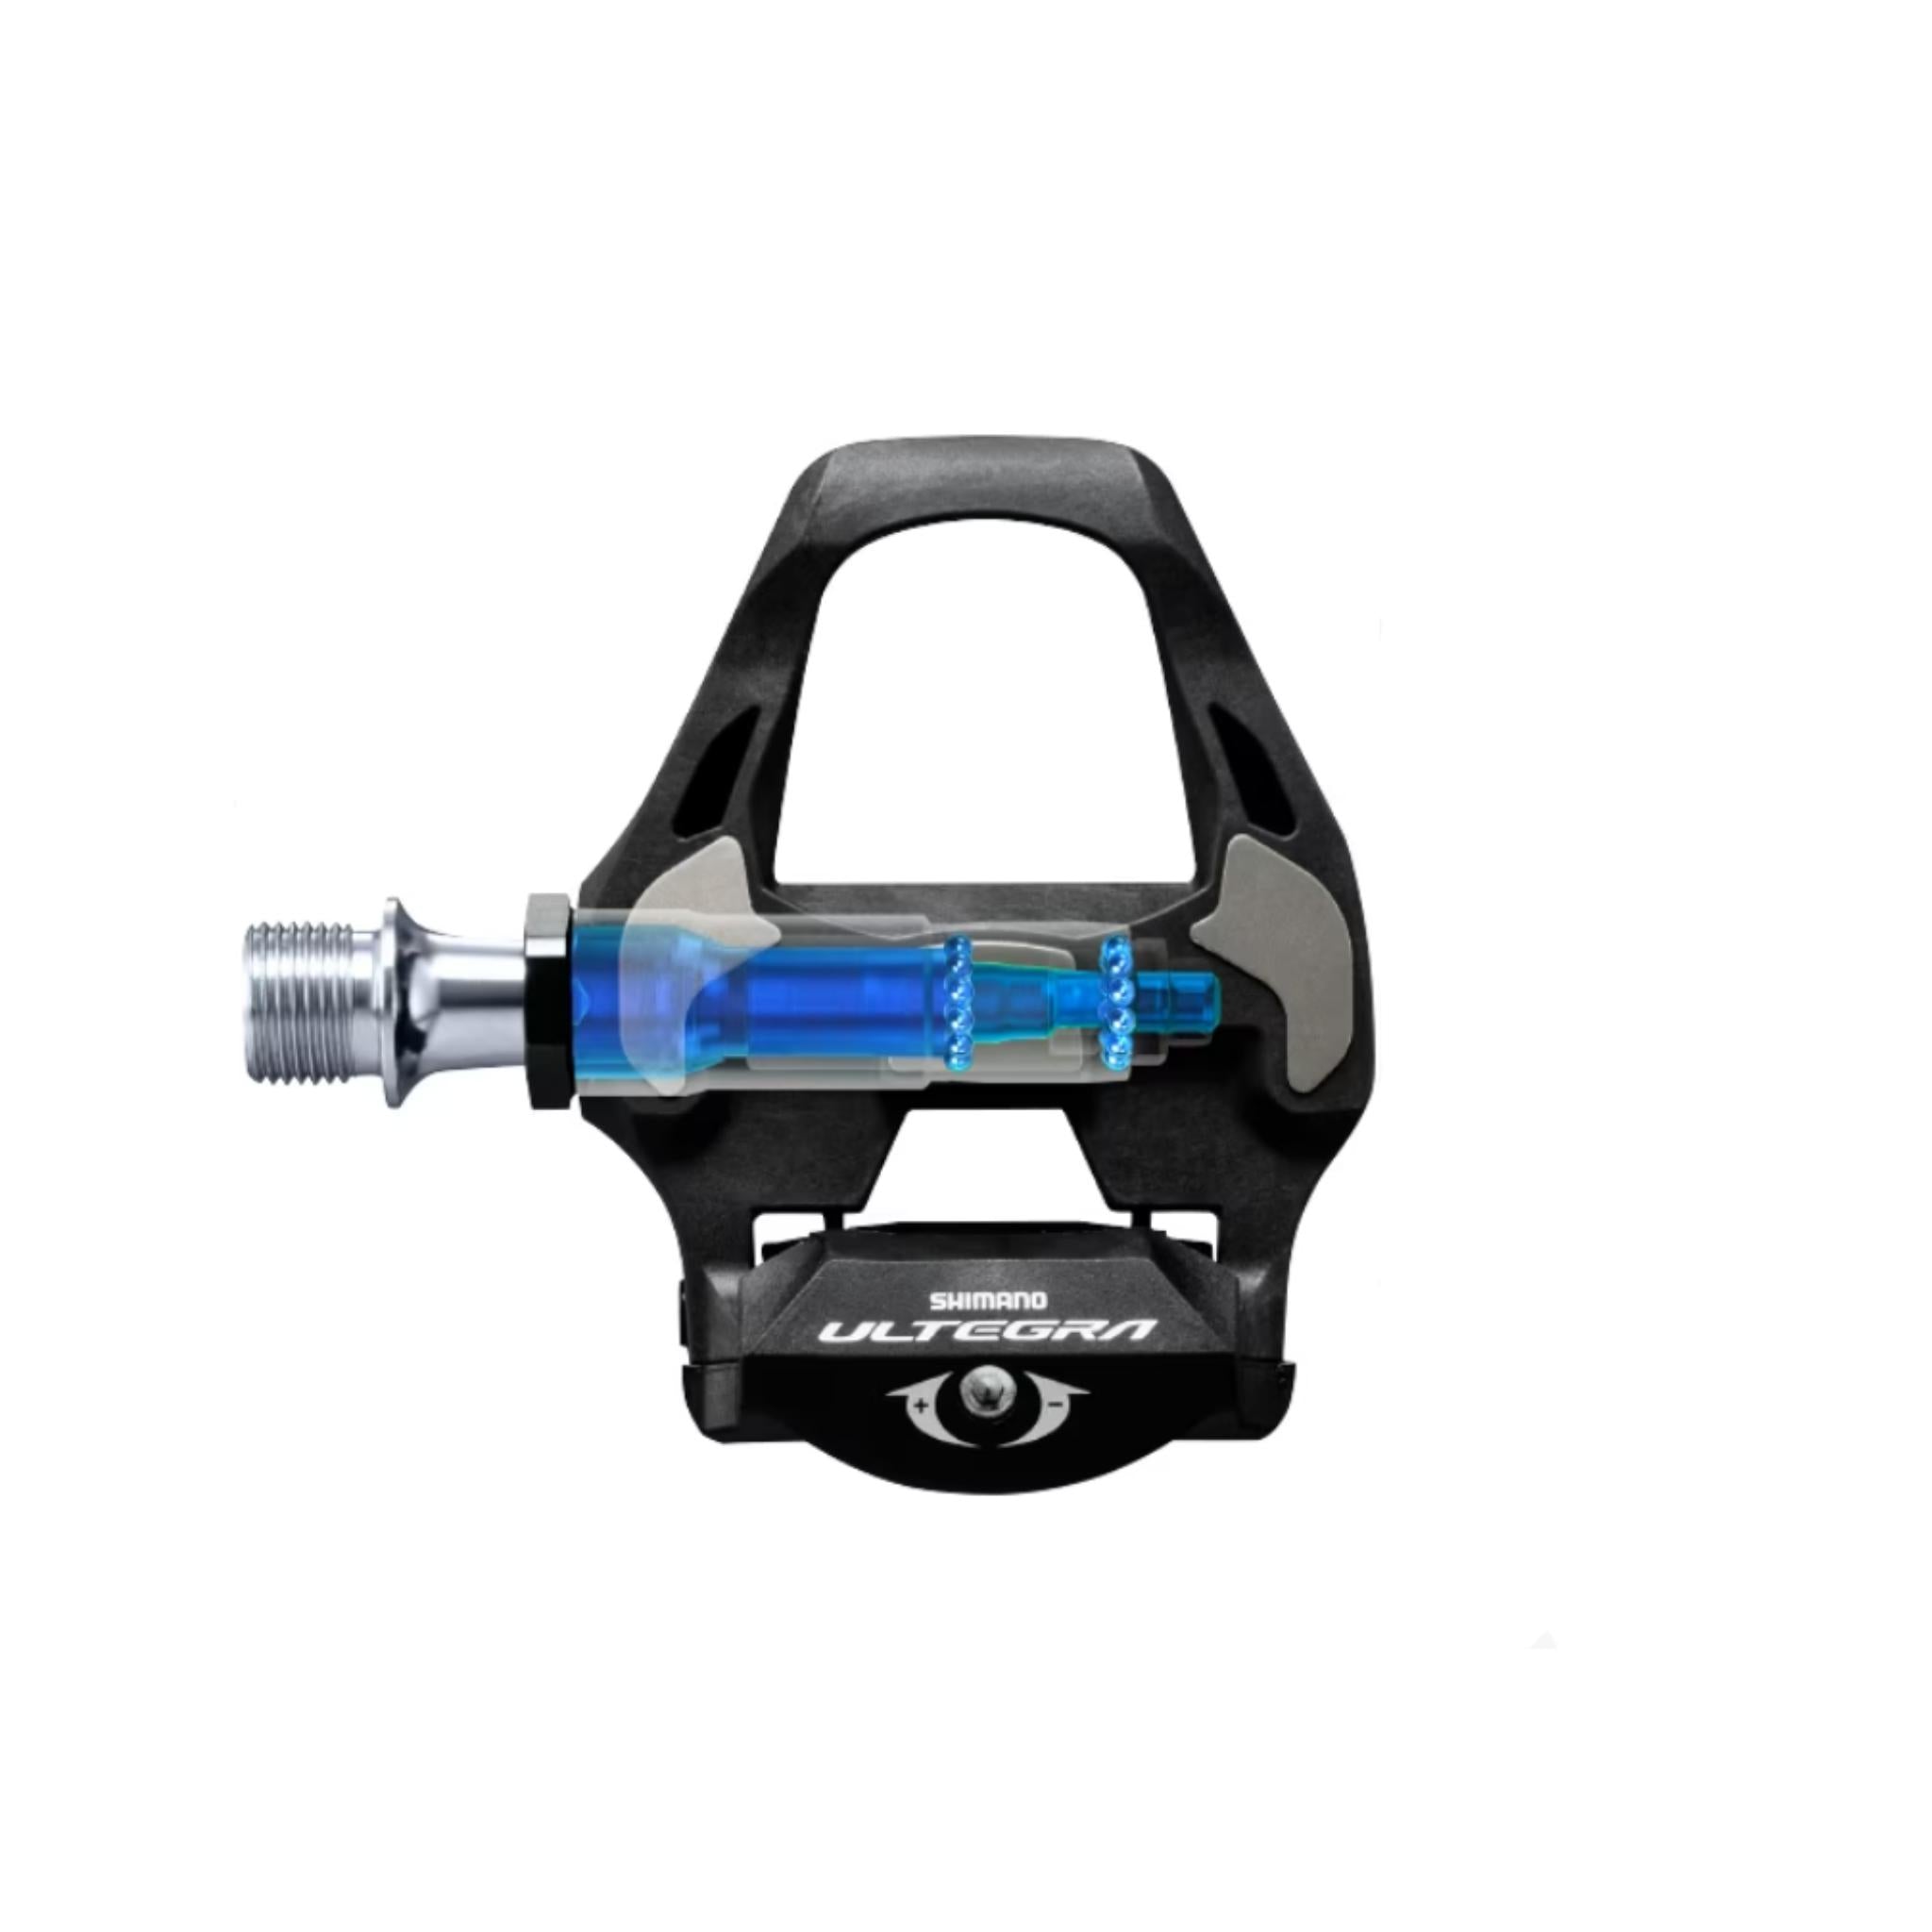 Shimano Ultegra PDR8000 SPD-SL Carbon Road Clipless Pedals